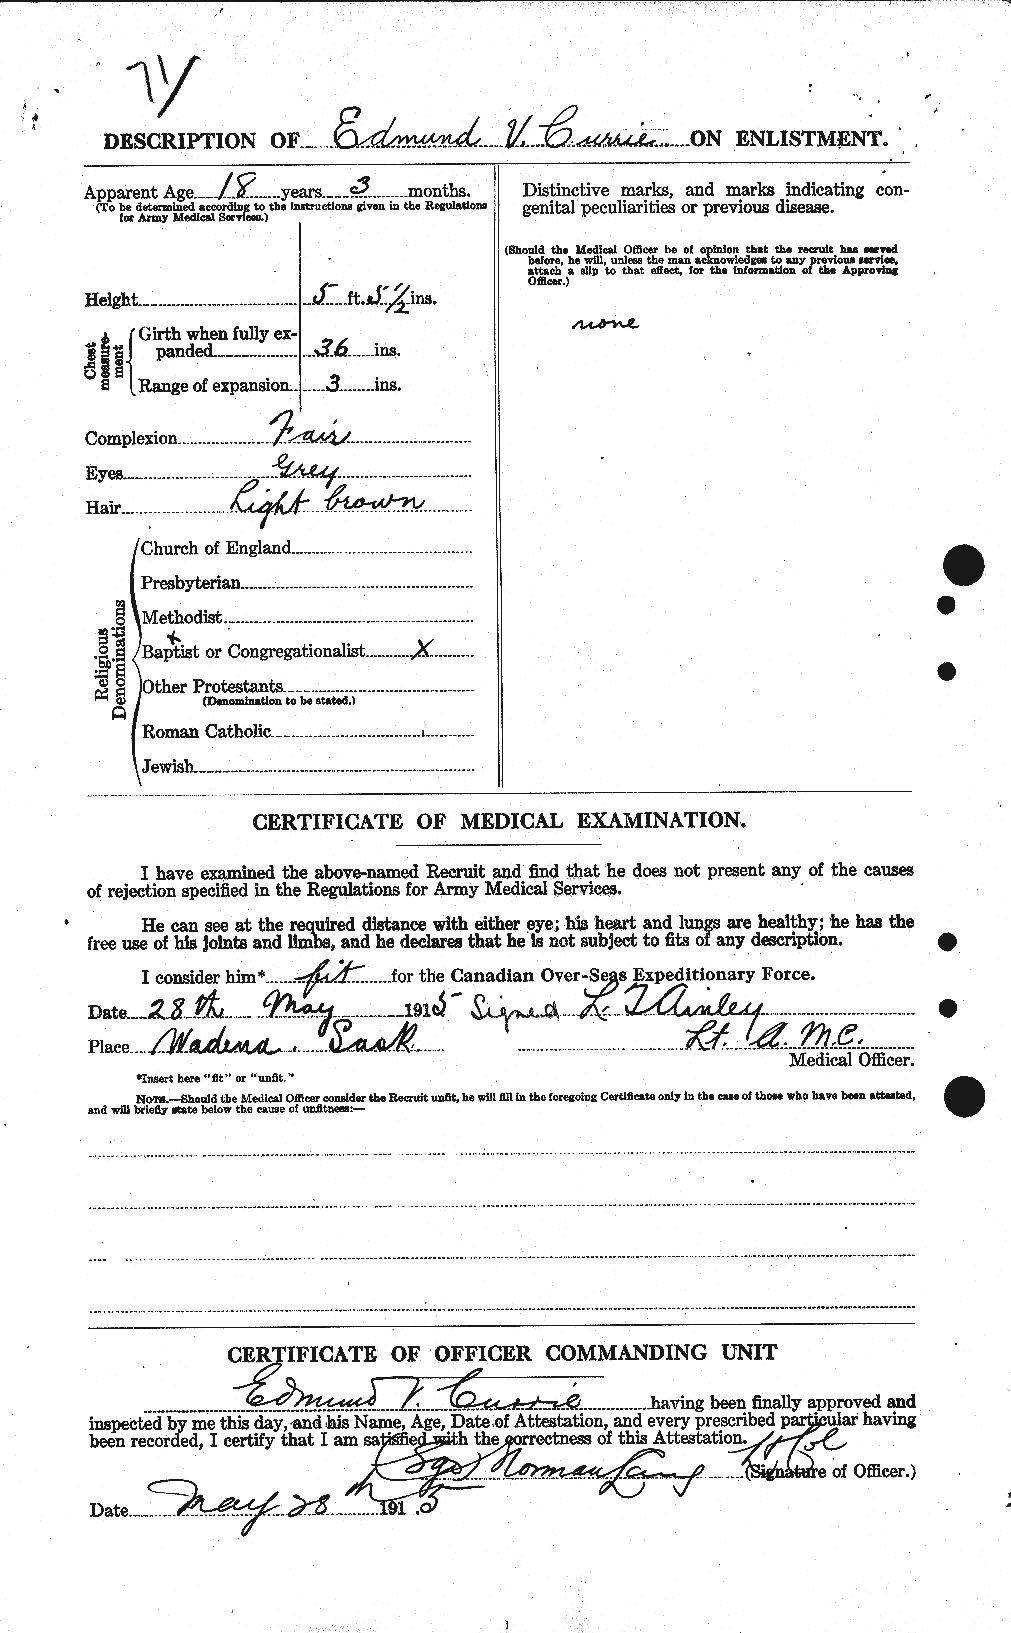 Personnel Records of the First World War - CEF 073018b